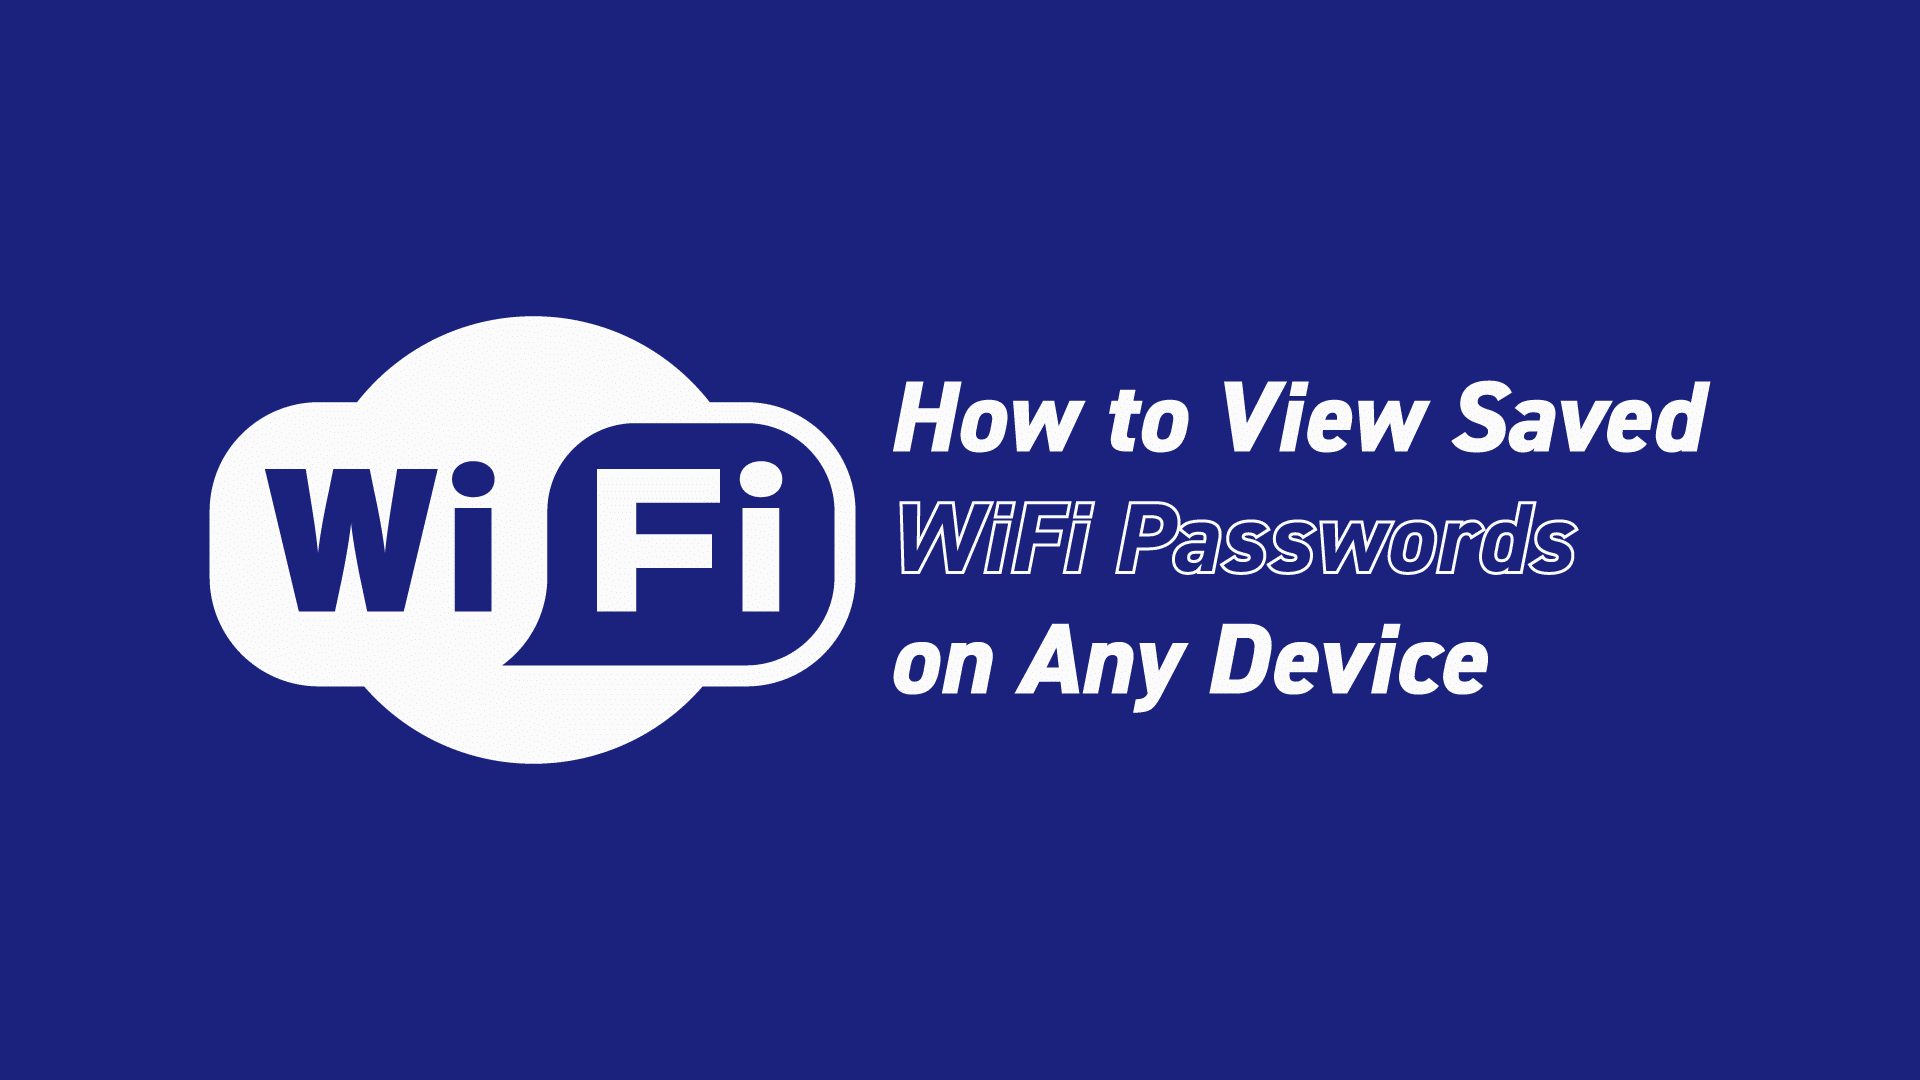 How to View Saved WiFi Passwords